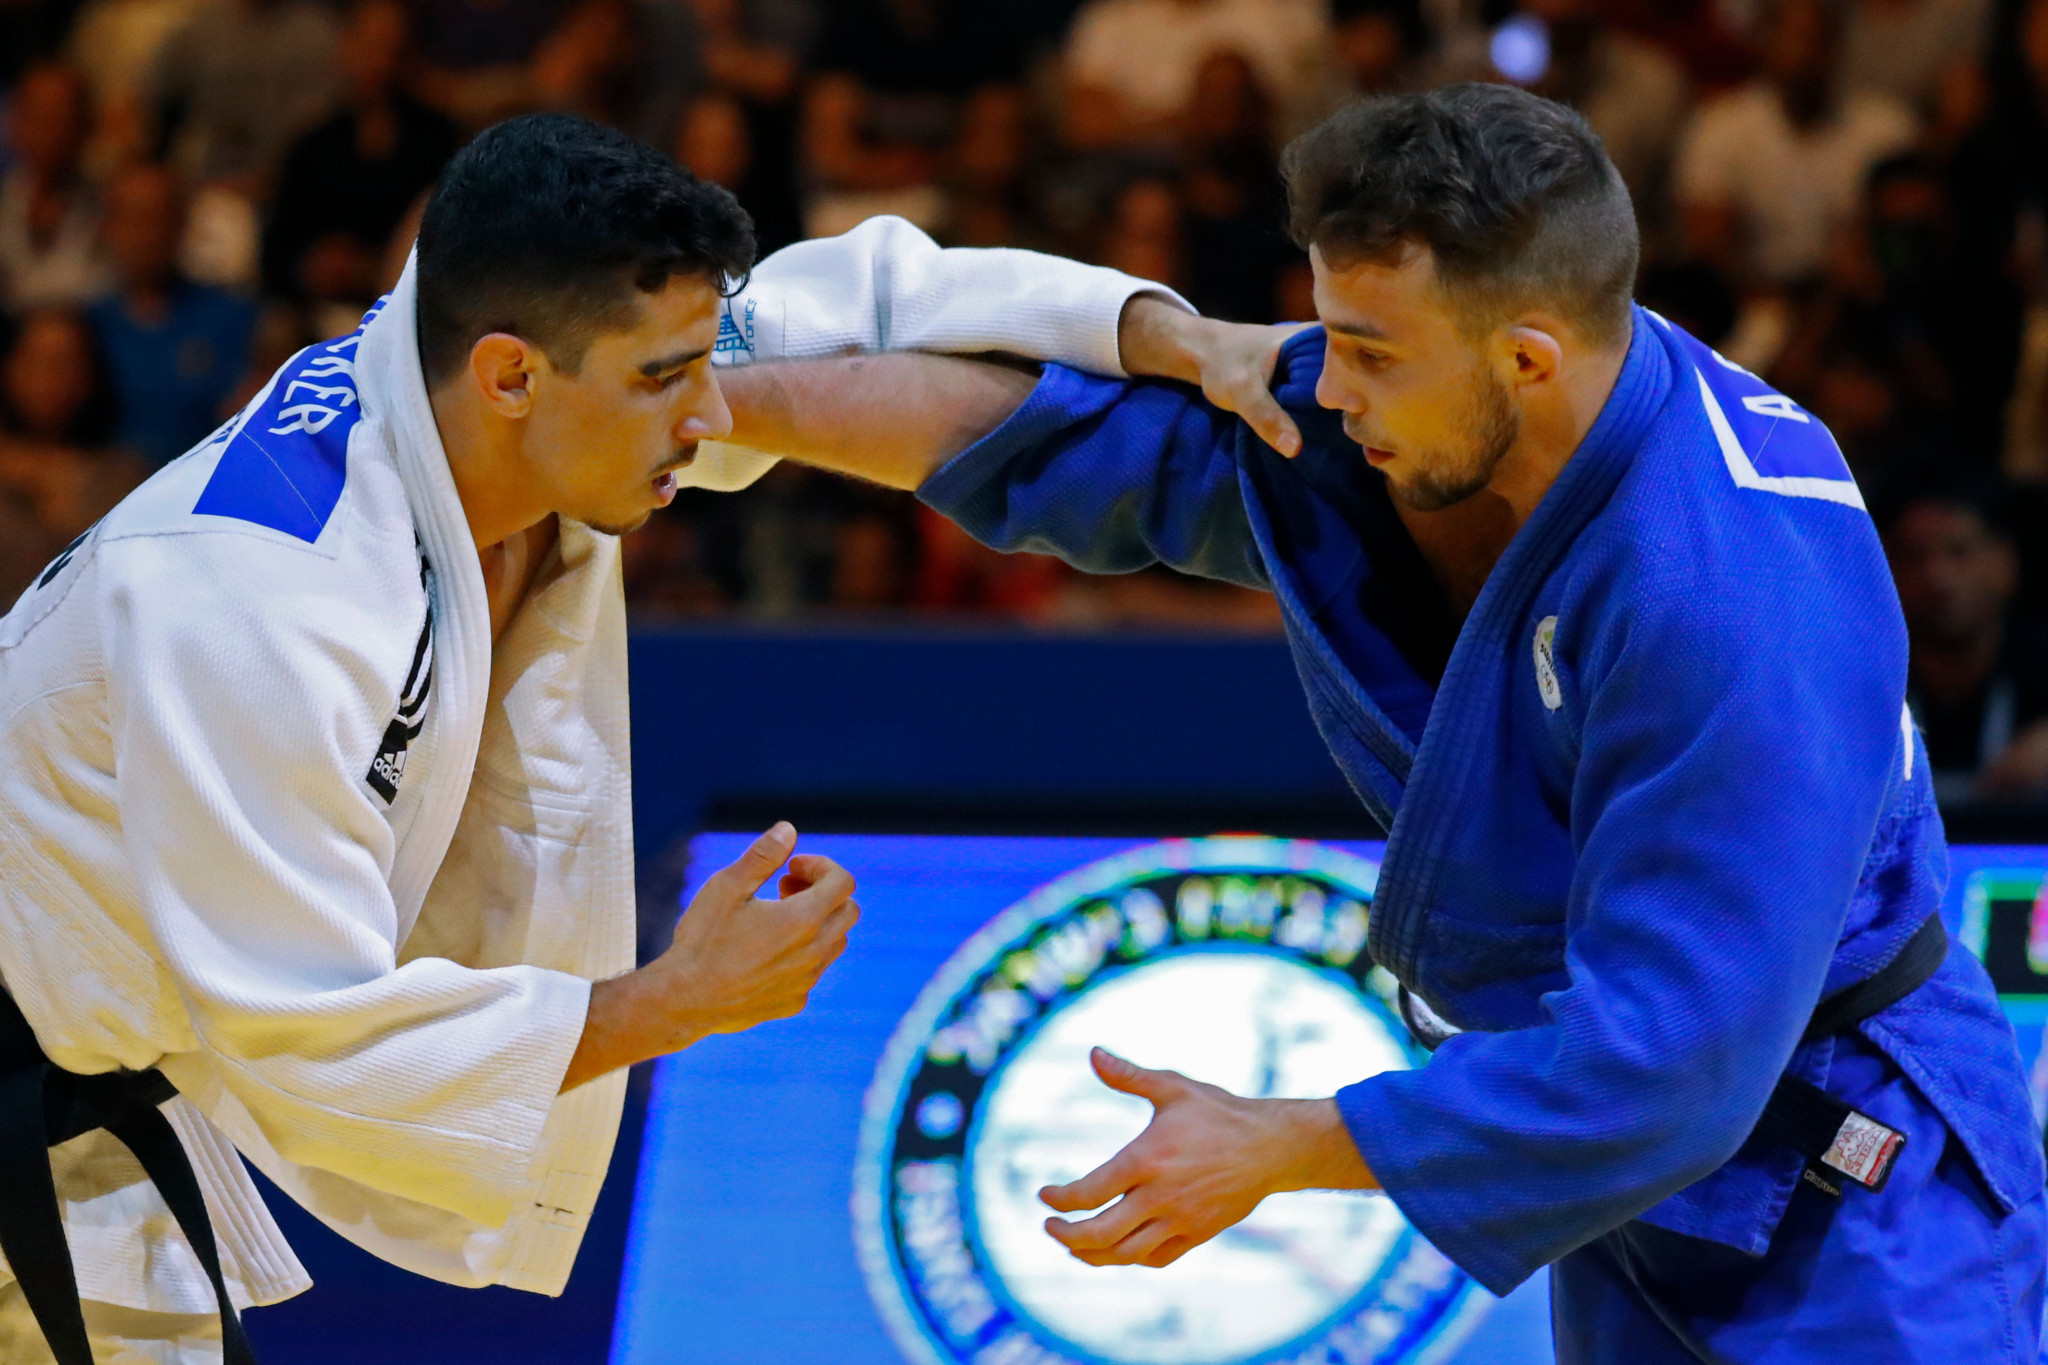 Organsiers of the Abu Dhabi Grand Slam refused to raise the flag or play the national anthem after Tal Flicker of Israel, left, won gold last year ©Getty Images